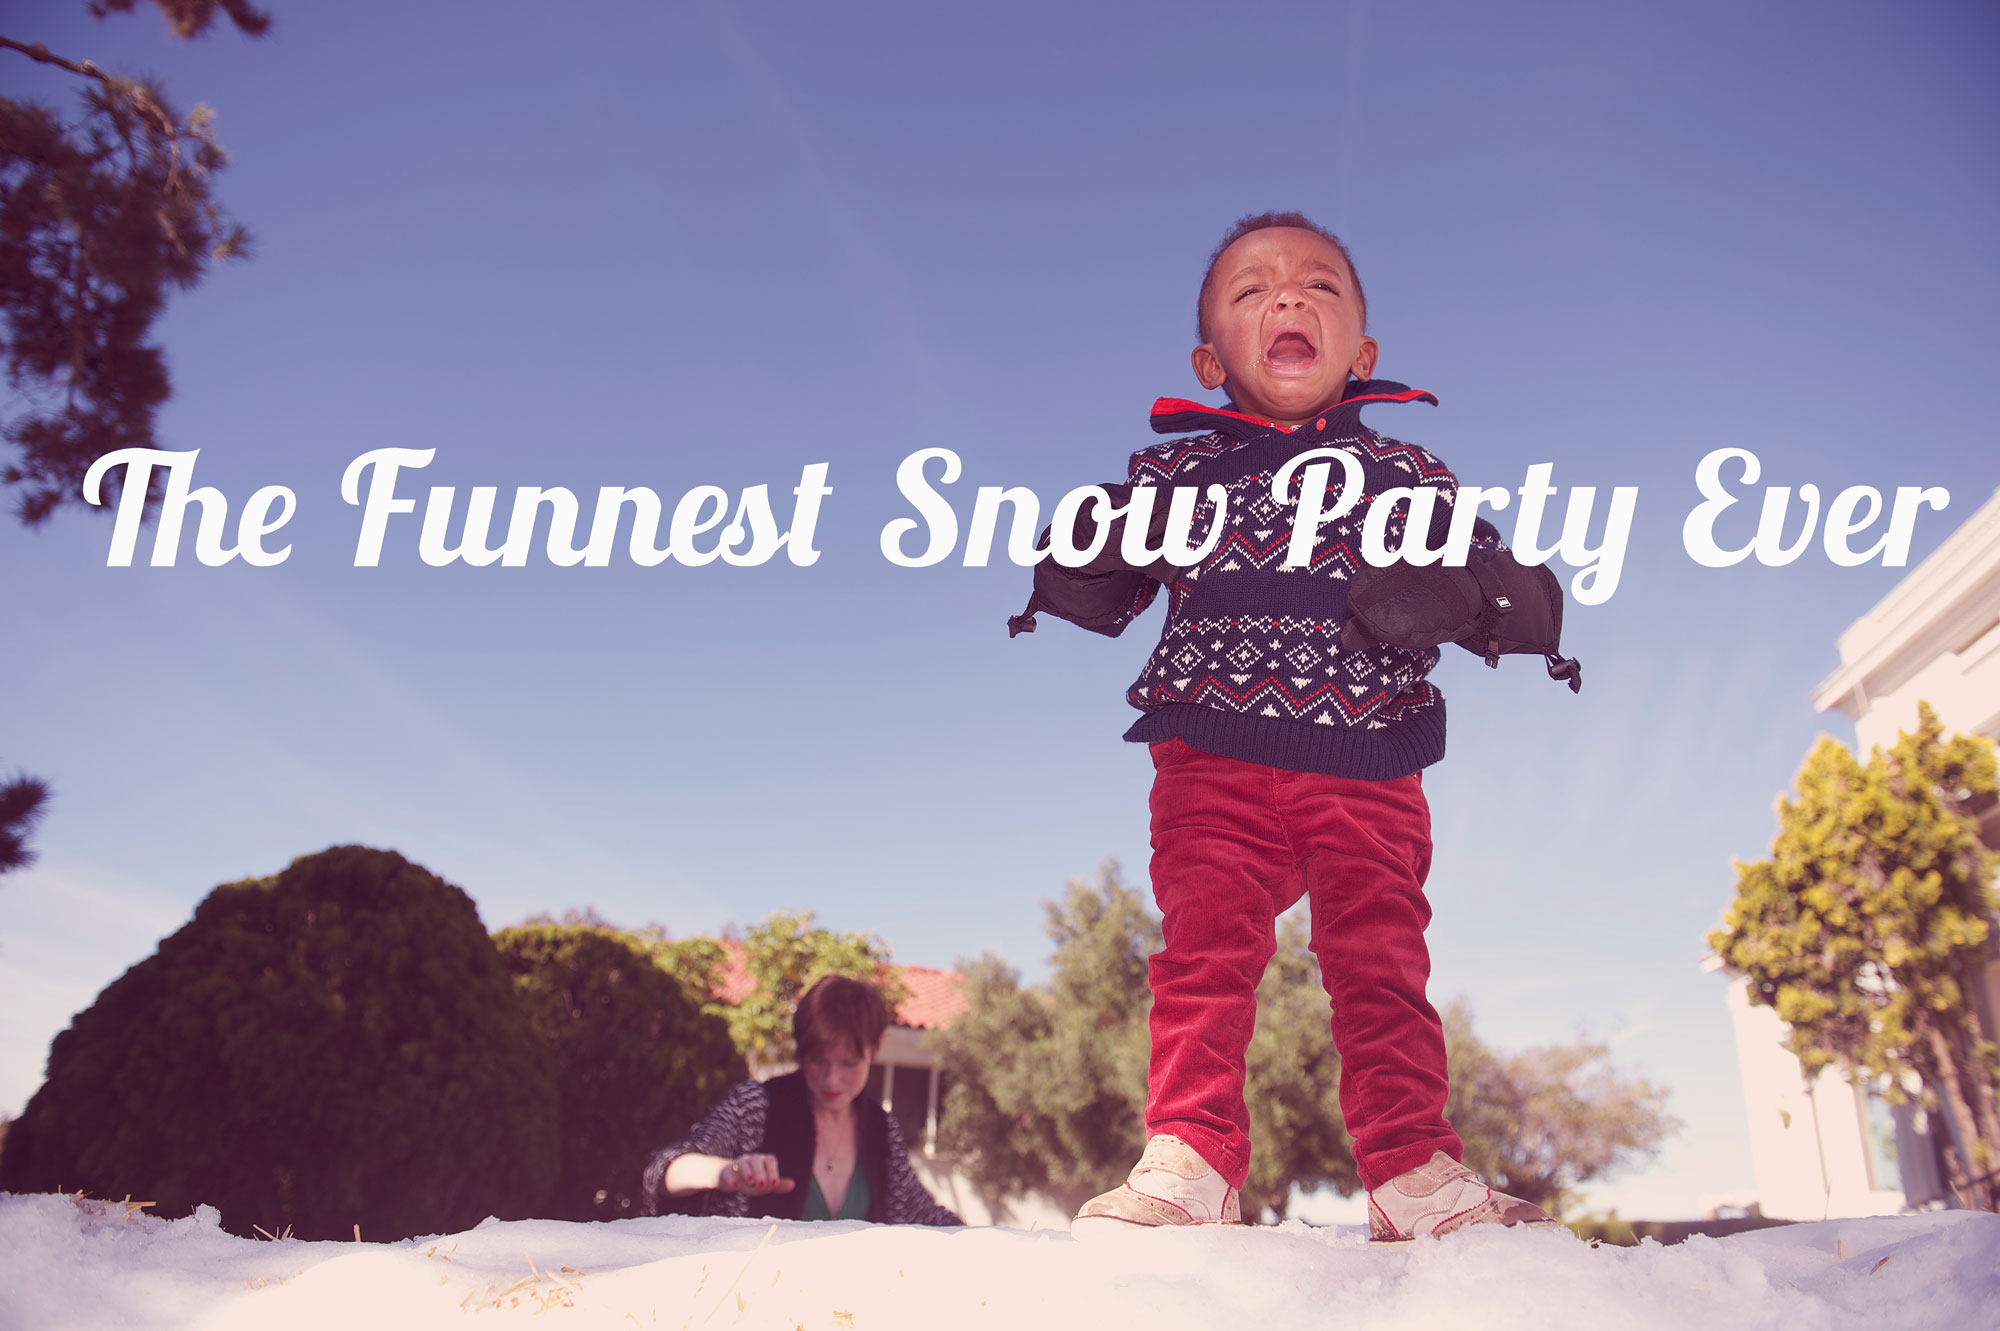 Funnest-snow-party-ever1